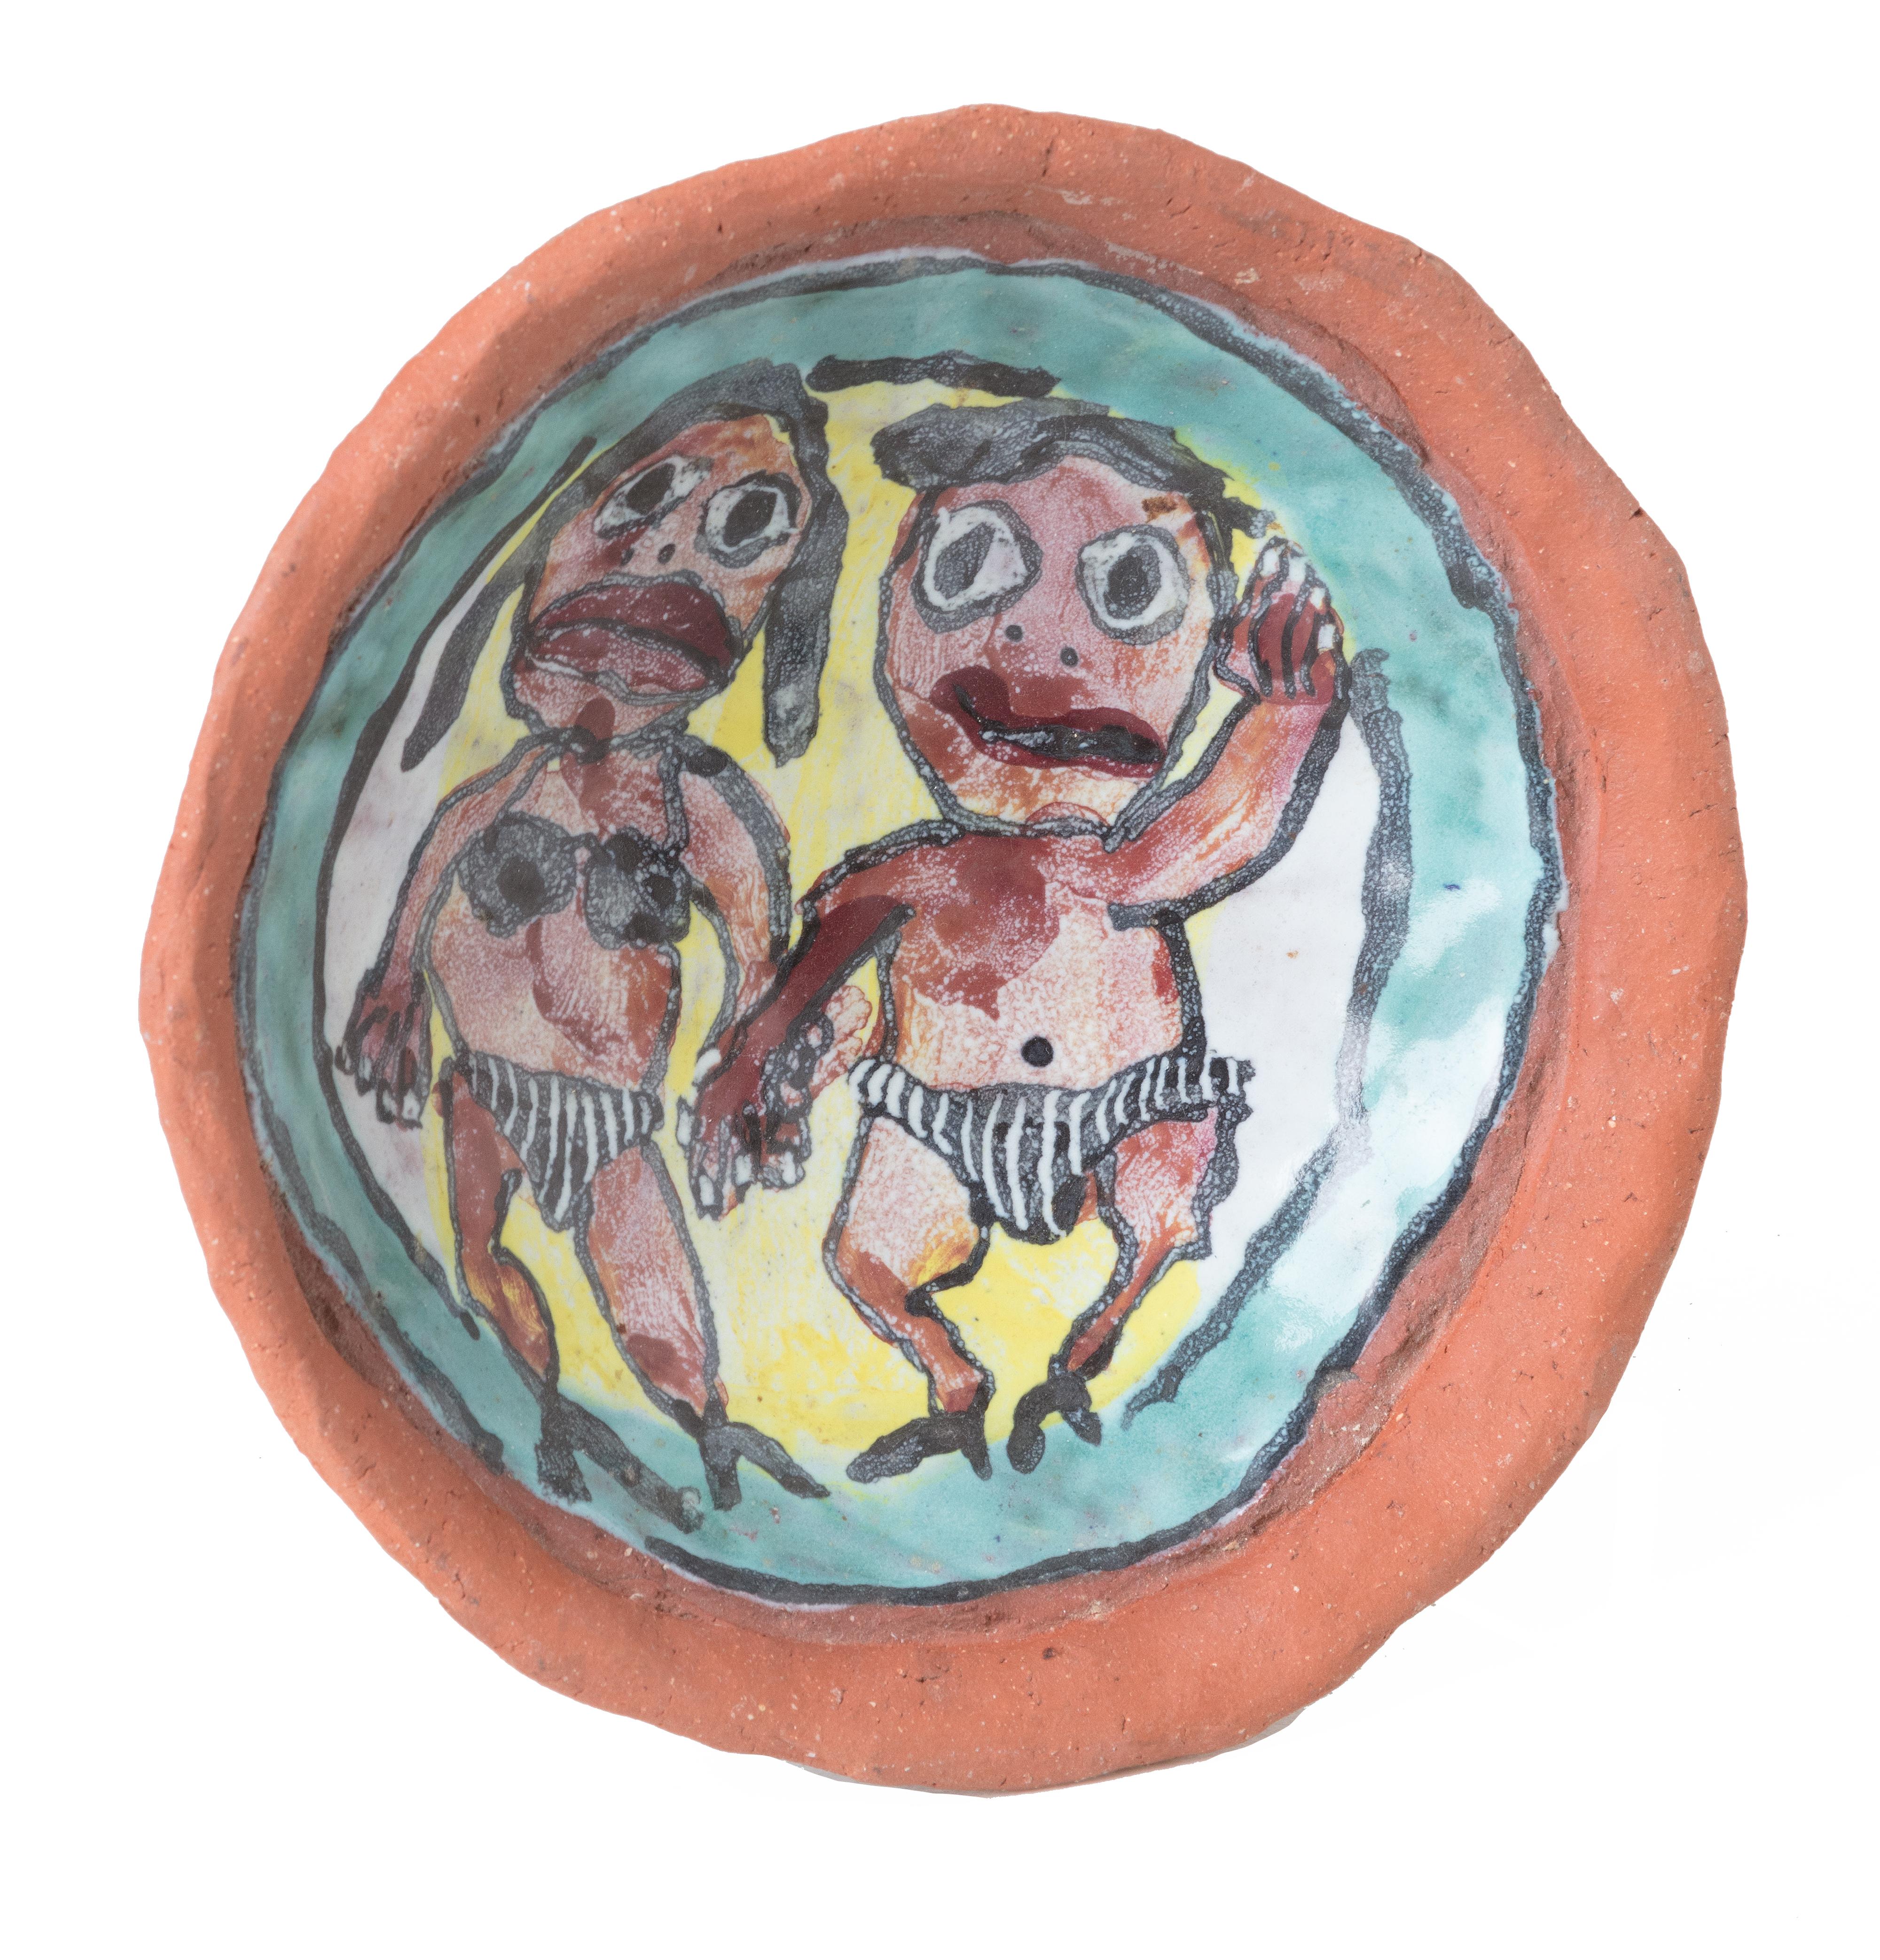 'Untitled (Man & Woman in bikinis)' Ceramic Bowl, signed and dated - Sculpture by Michael Gross